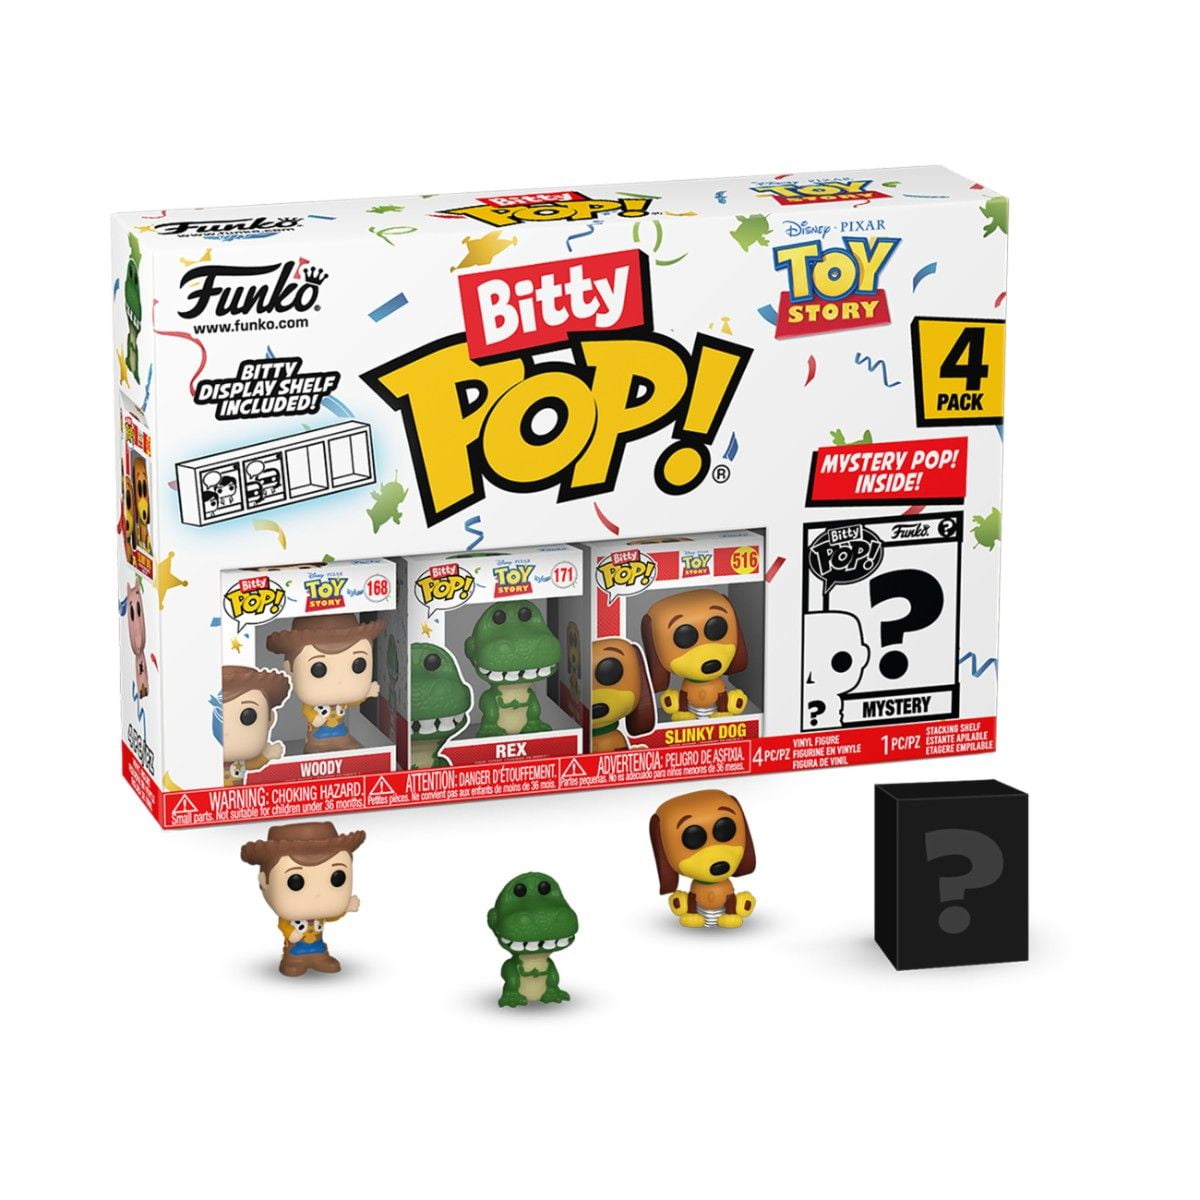 Woody - Toy Story - Funko Bitty POP! (4 Pack)